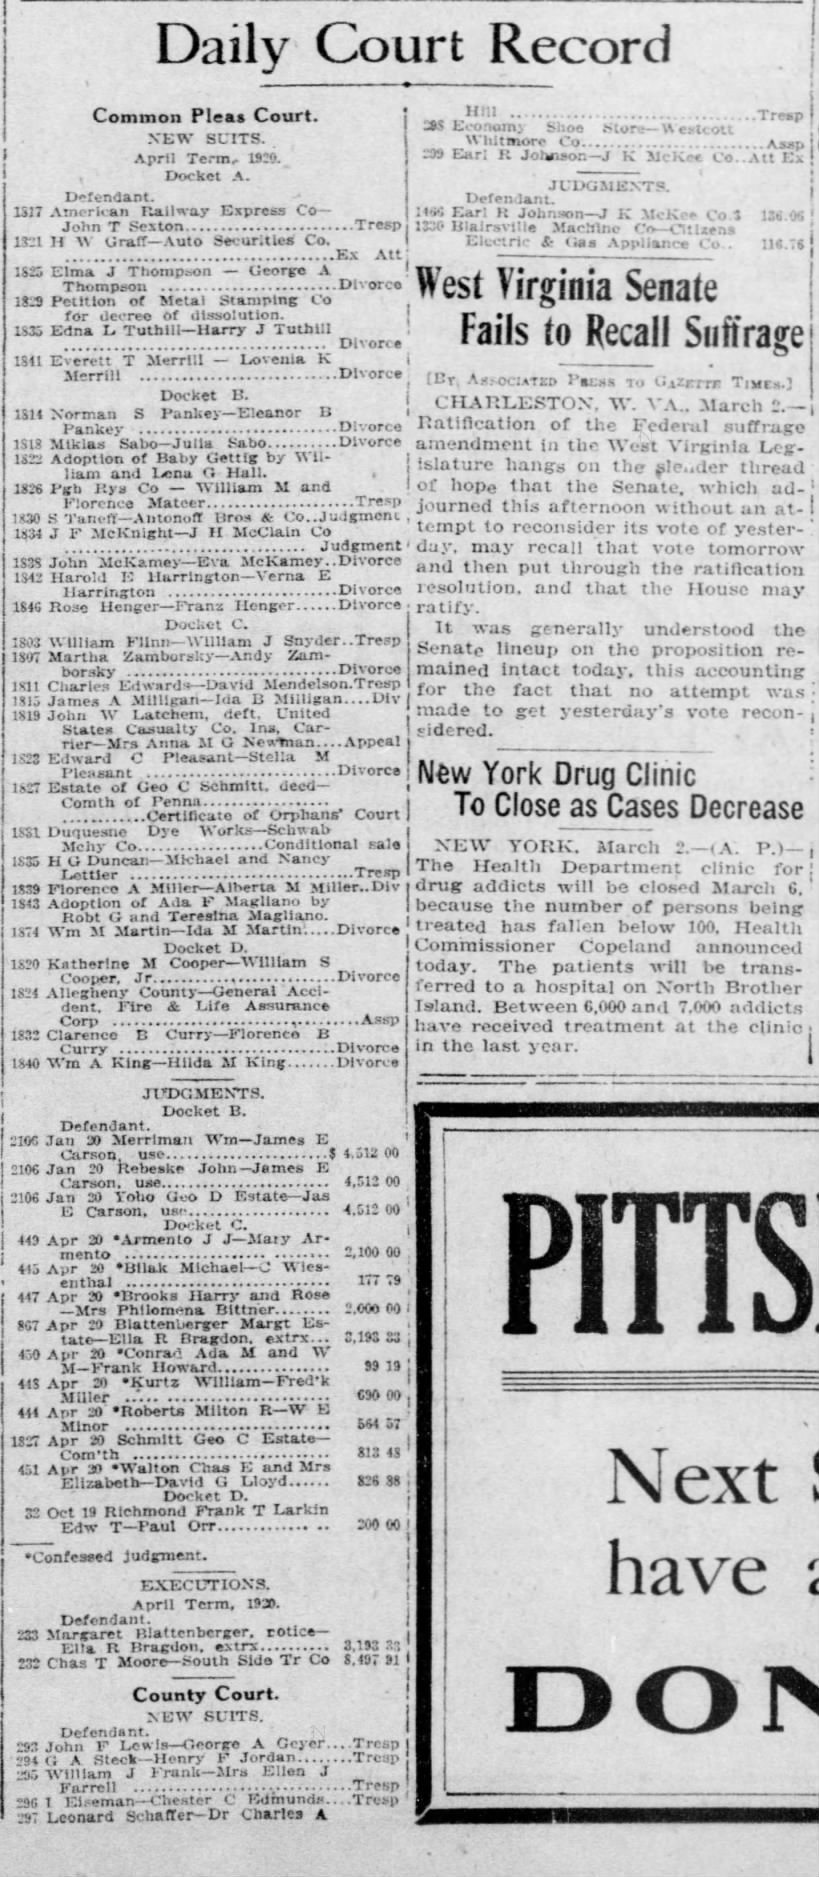 Daily Court Record in the Pittsburgh Gazette Times (Post-Gazette), 1920